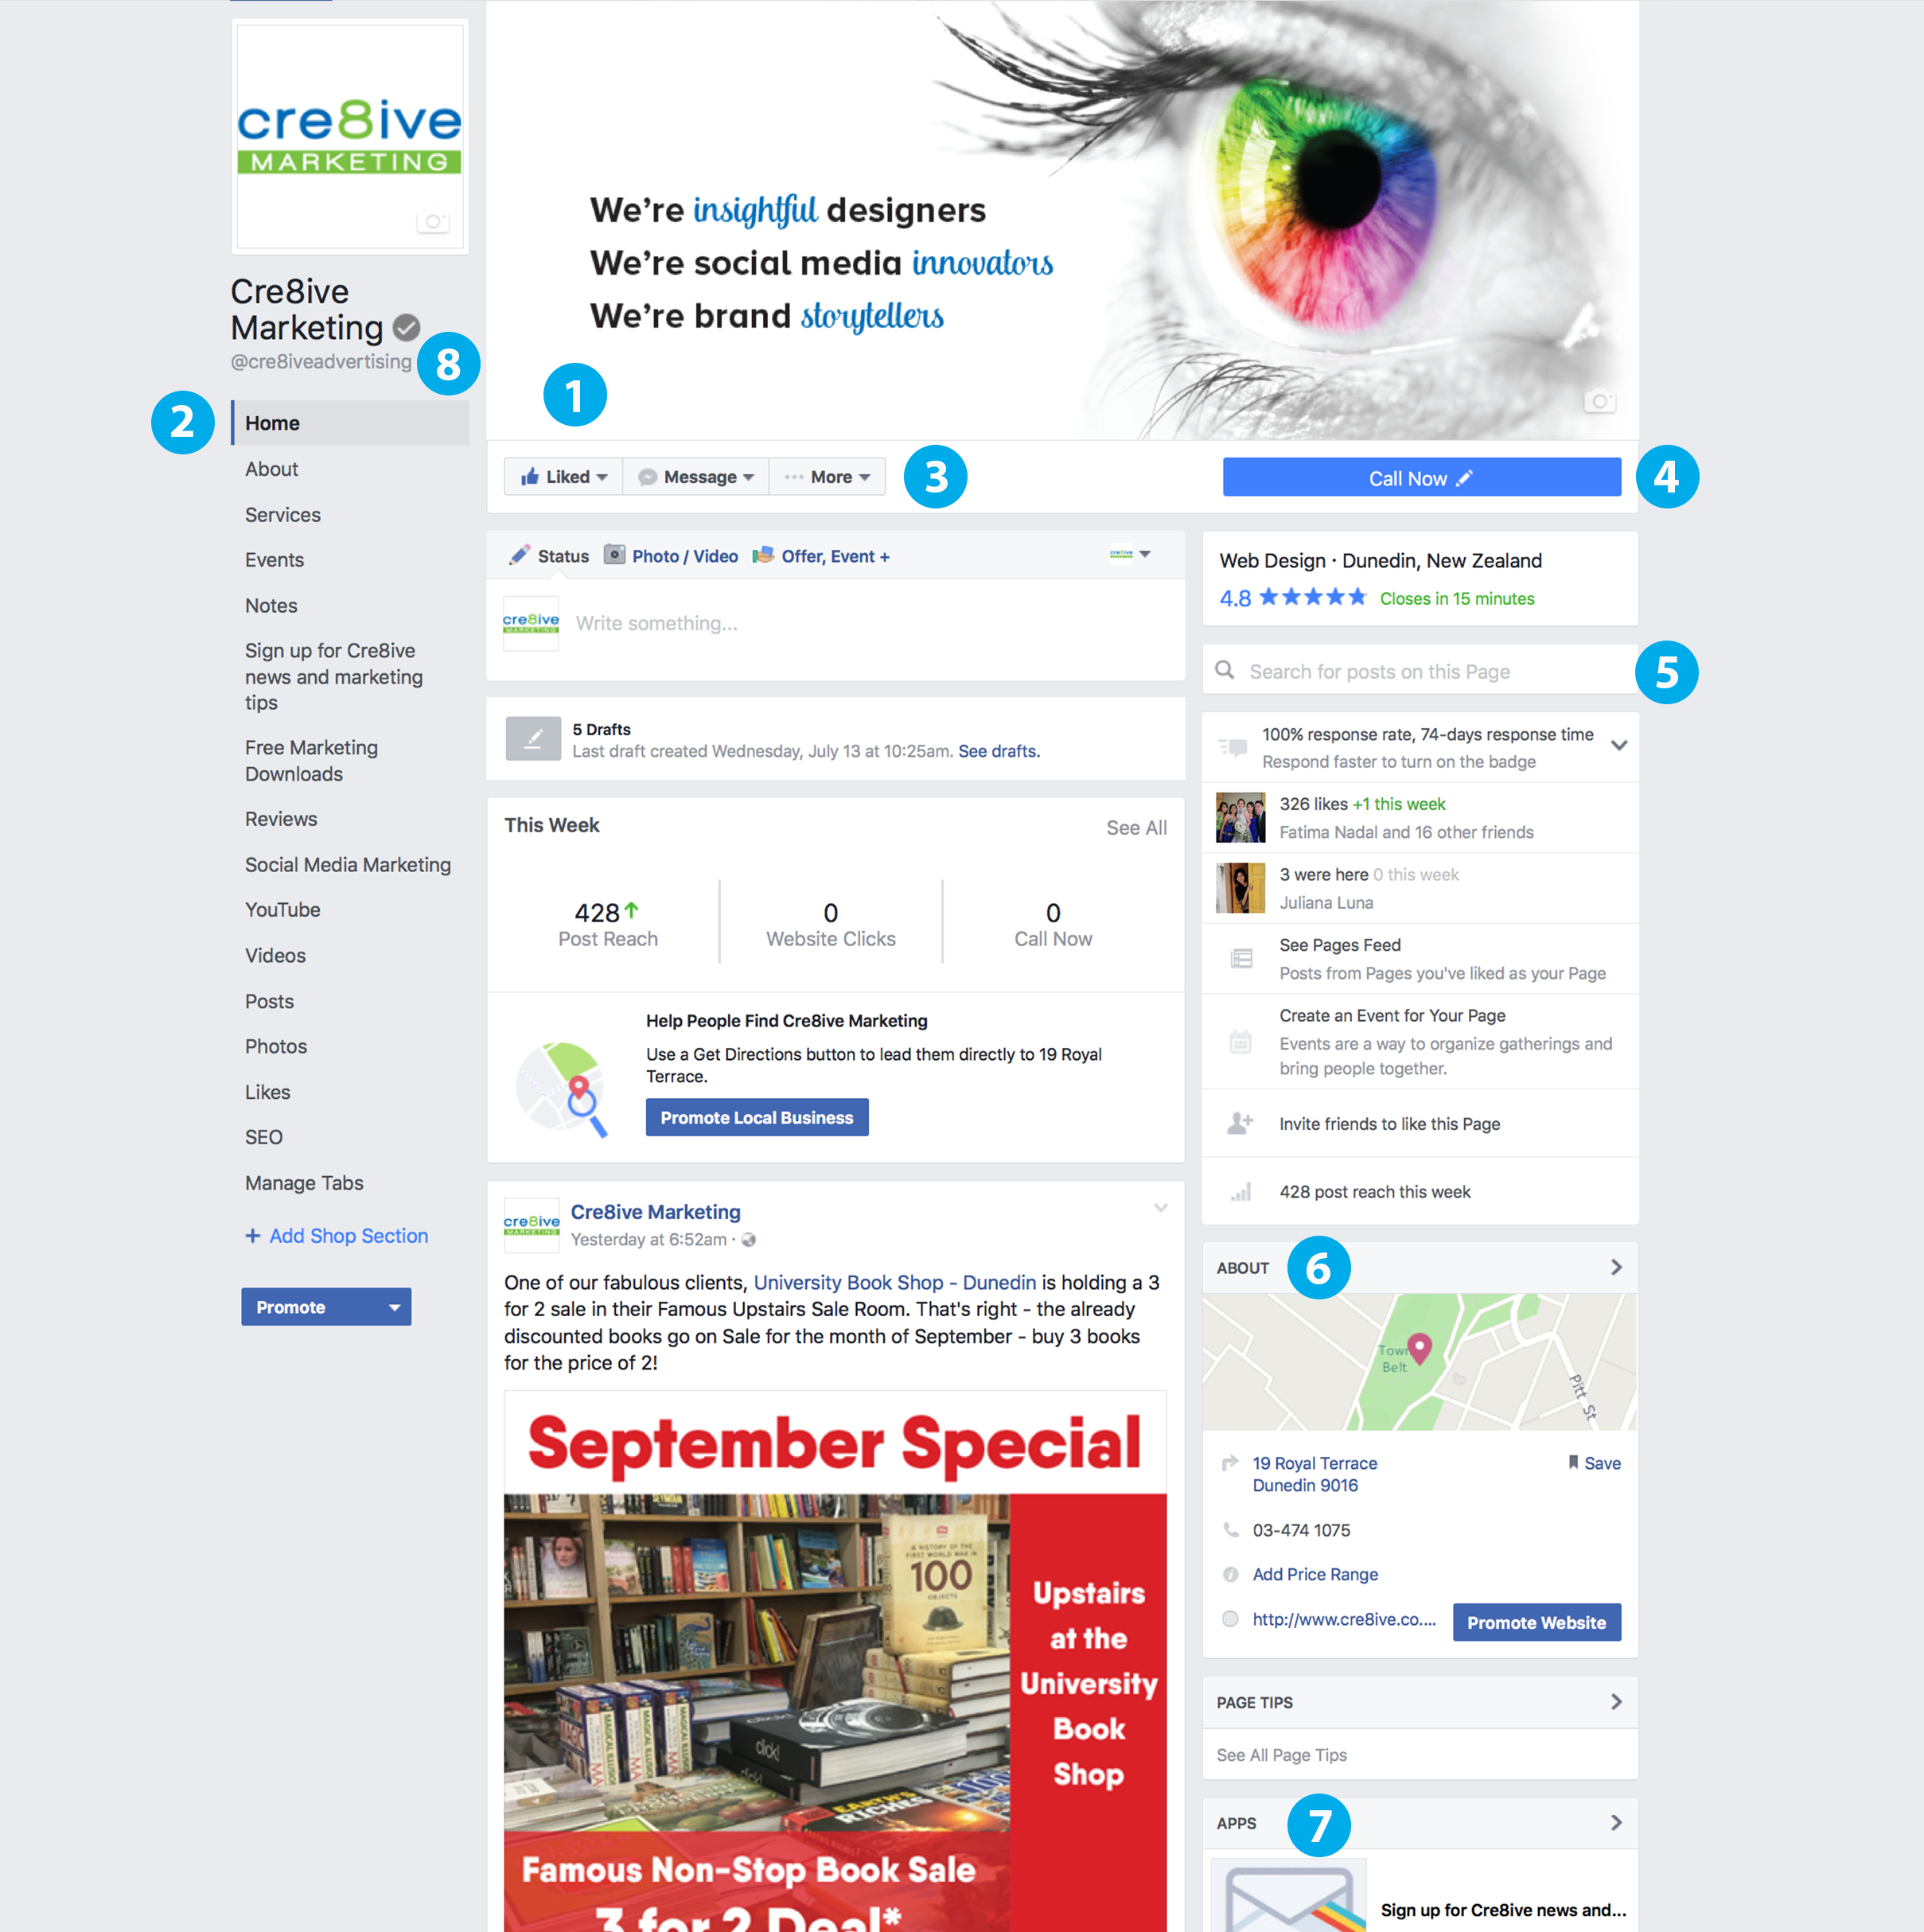 What You Need to Know About Facebook’s New Pages Layout